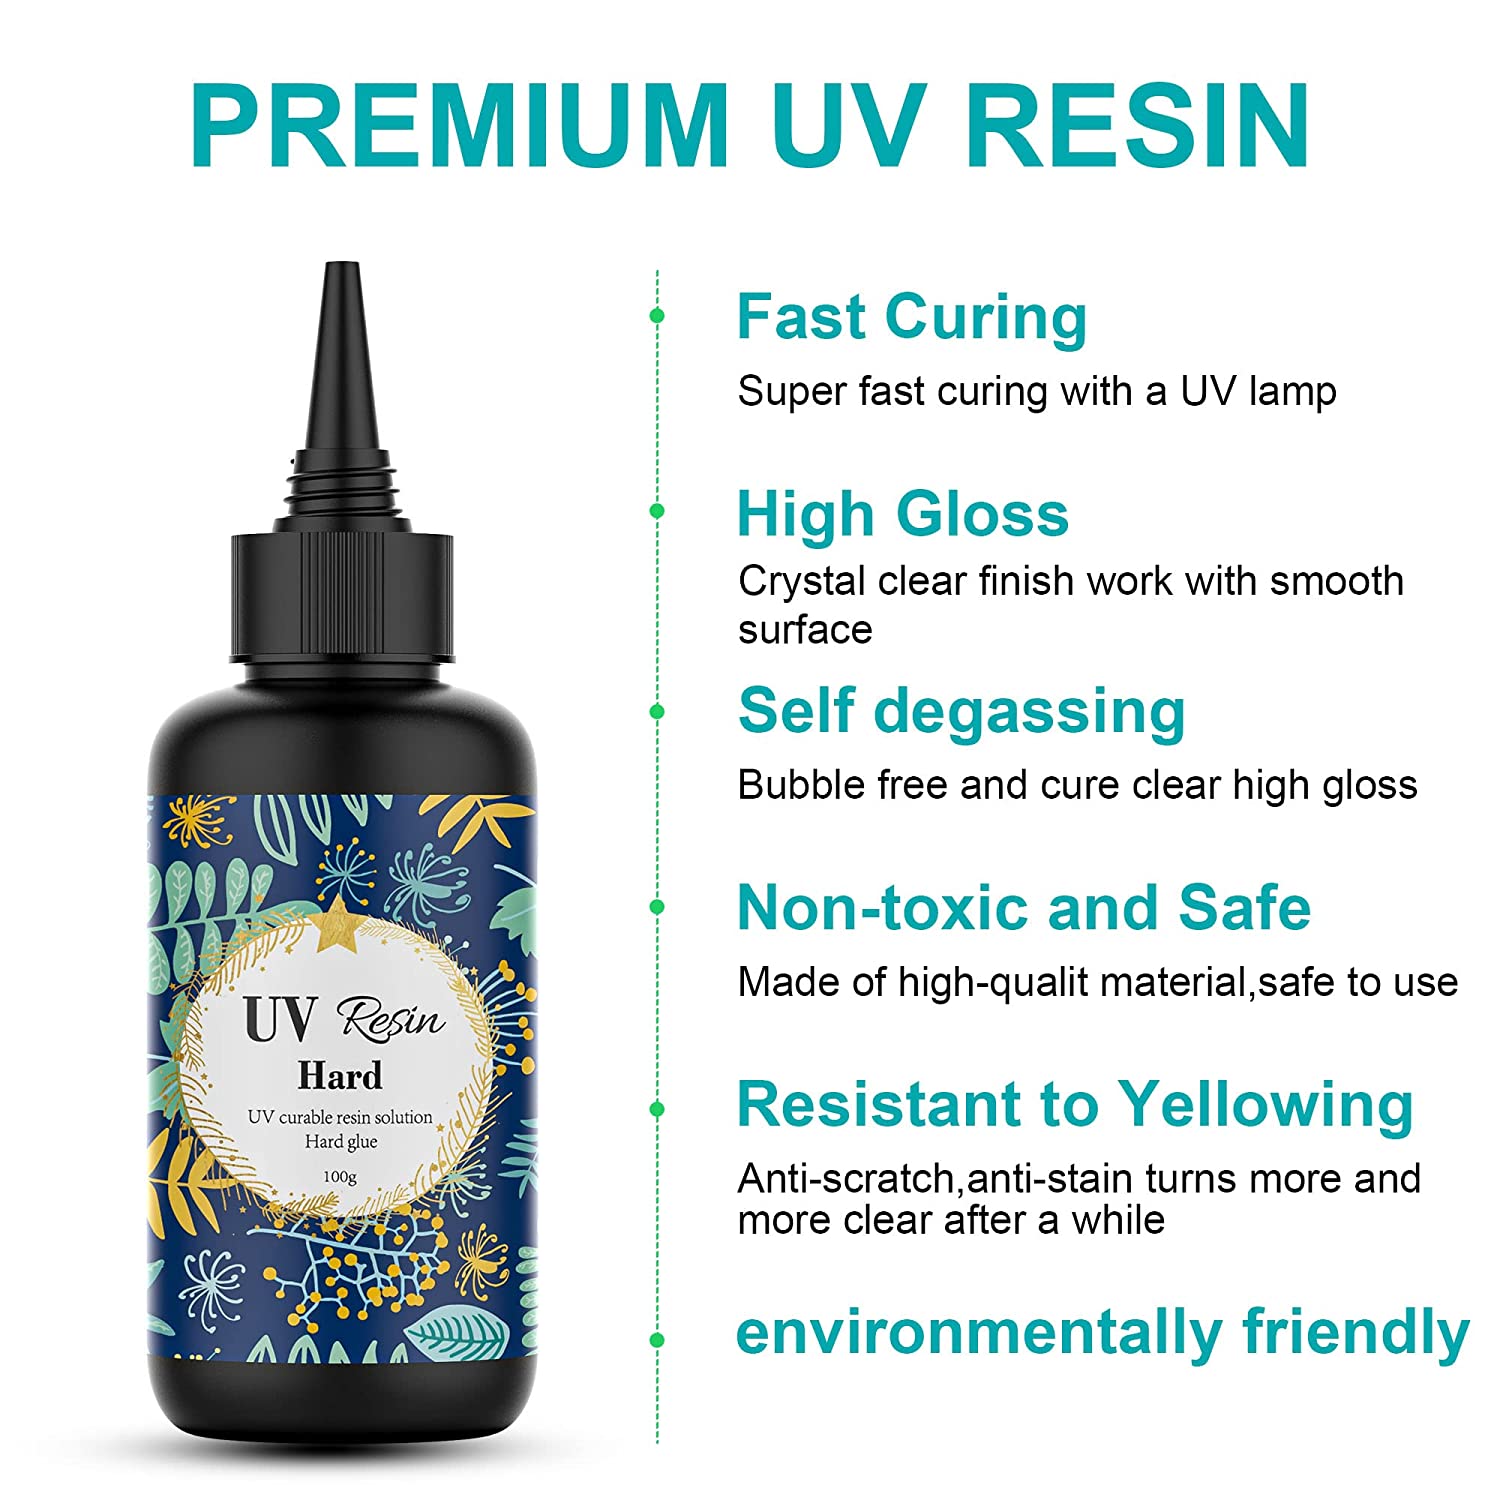 UV Resin Kit with Light-100g UV Resin with UV Flashlight,Crystal Clear  Resin Glue for DIY Jewellery Making,UV Resin Kit for DIY Beginners  Introductory